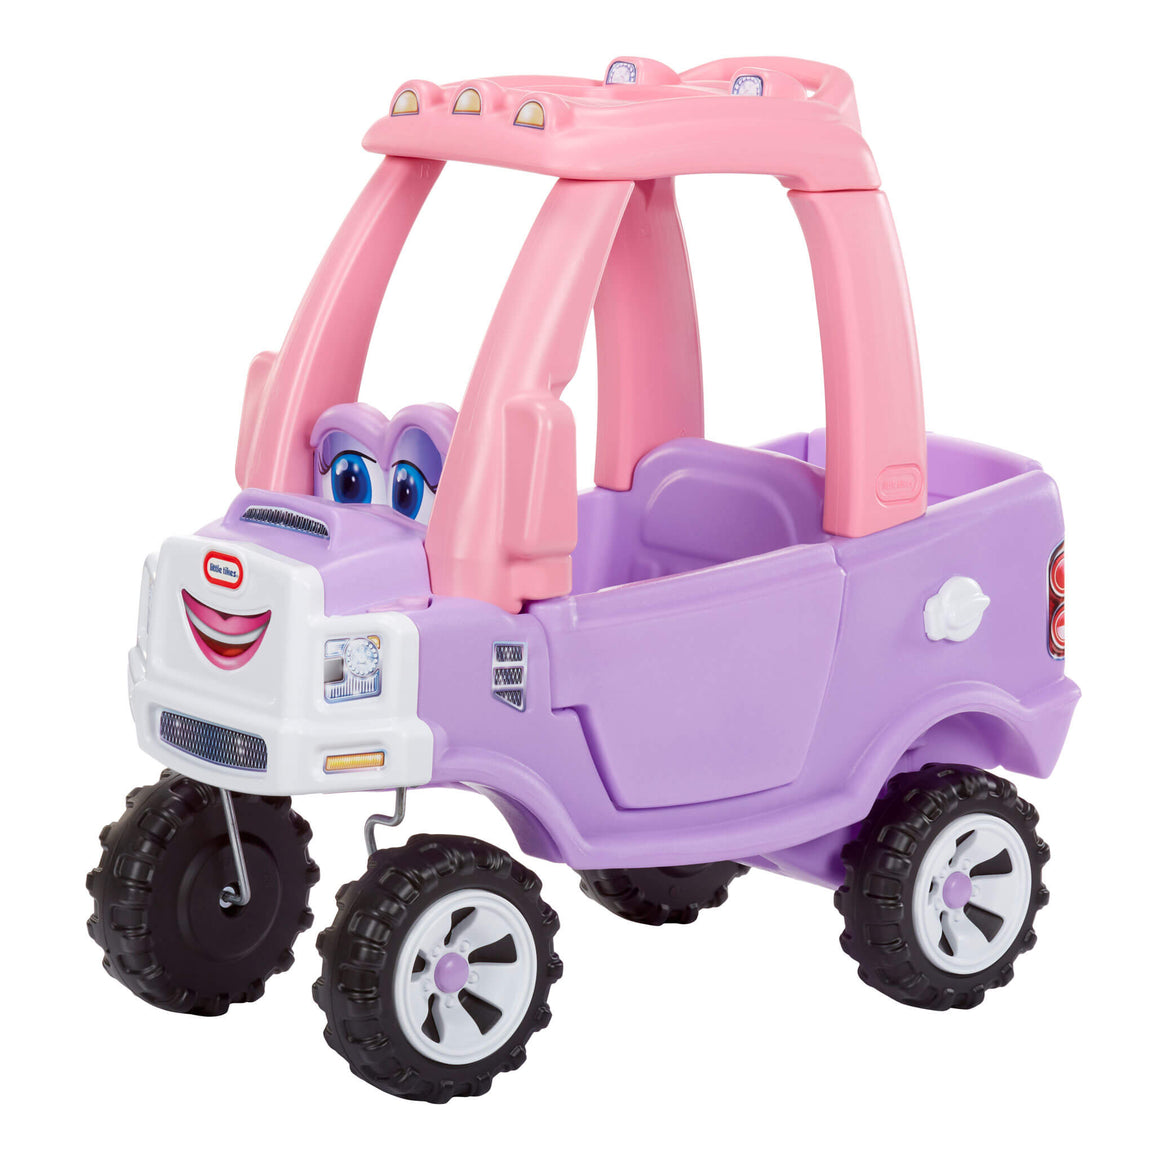 Princess Cozy Truck pink and purple